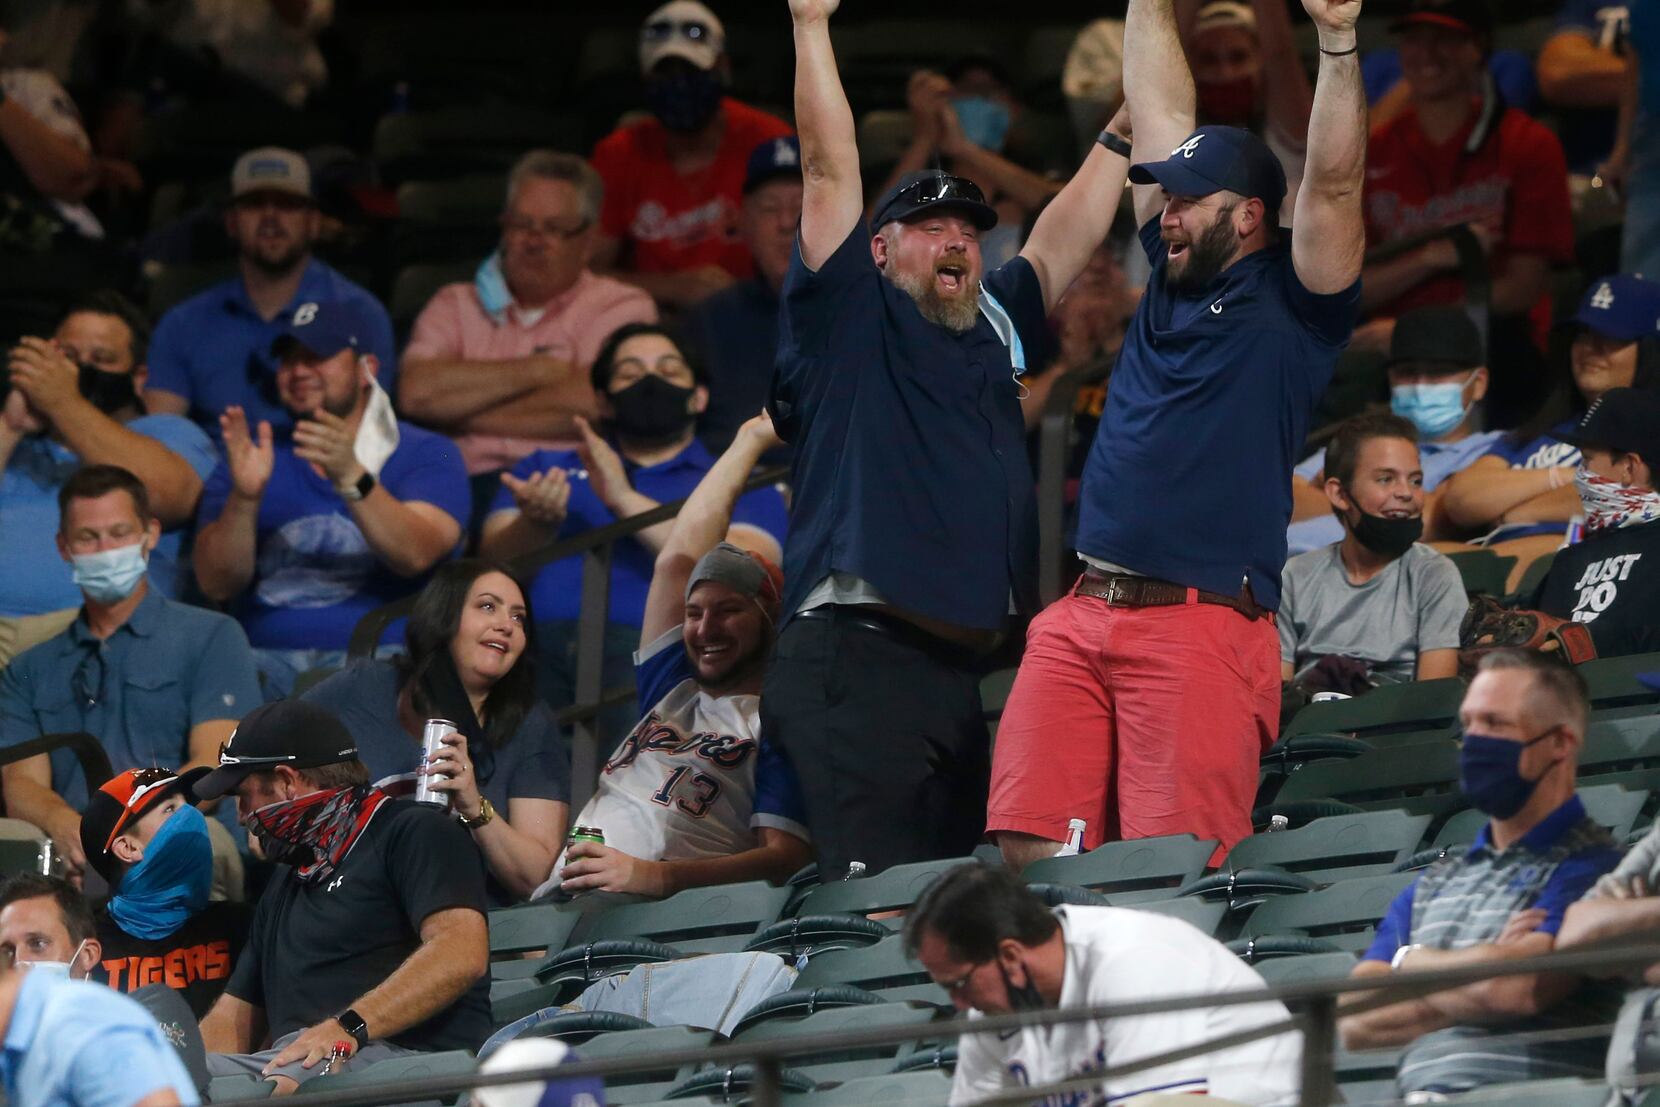 Texas Rangers Host 12,911 Fans at Exhibition Game - The New York Times